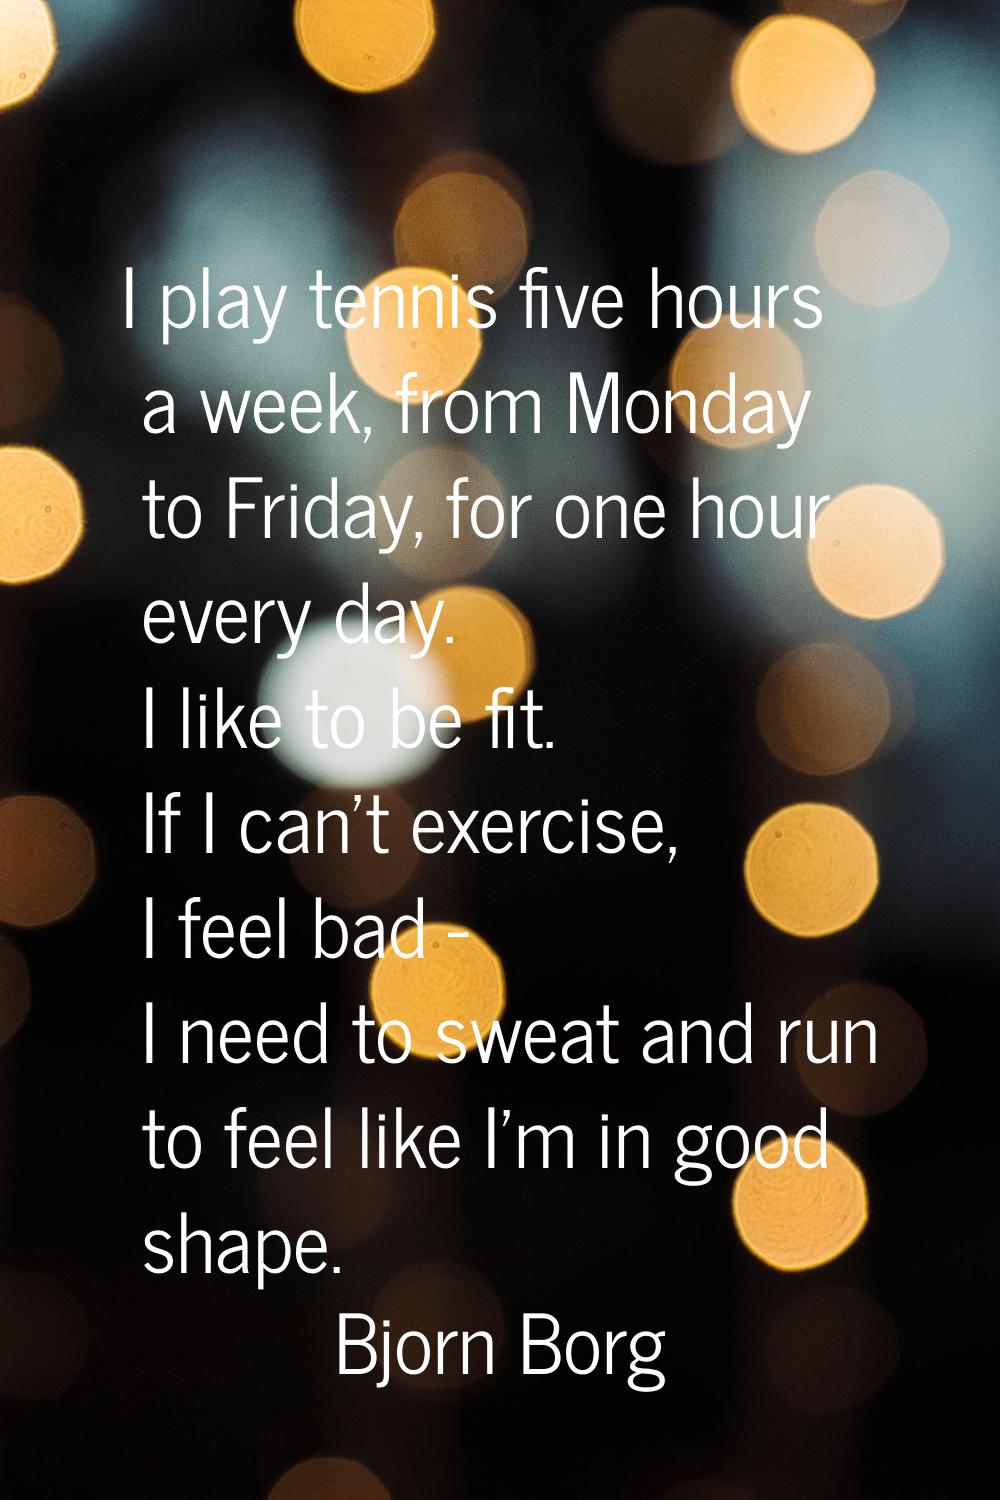 I play tennis five hours a week, from Monday to Friday, for one hour every day. I like to be fit. I